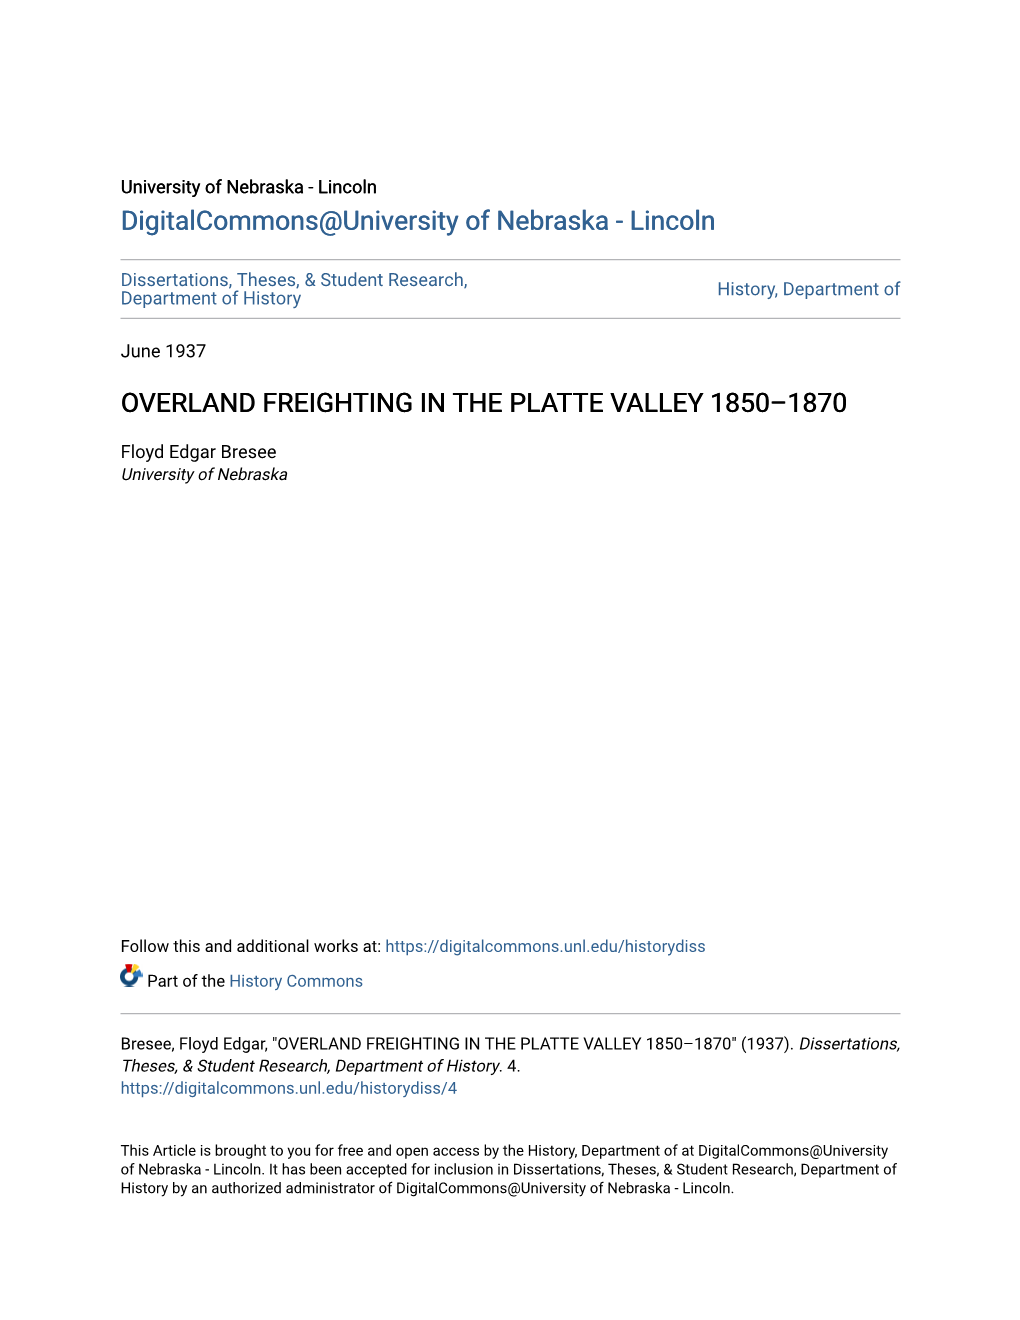 Overland Freighting in the Platte Valley 1850–1870